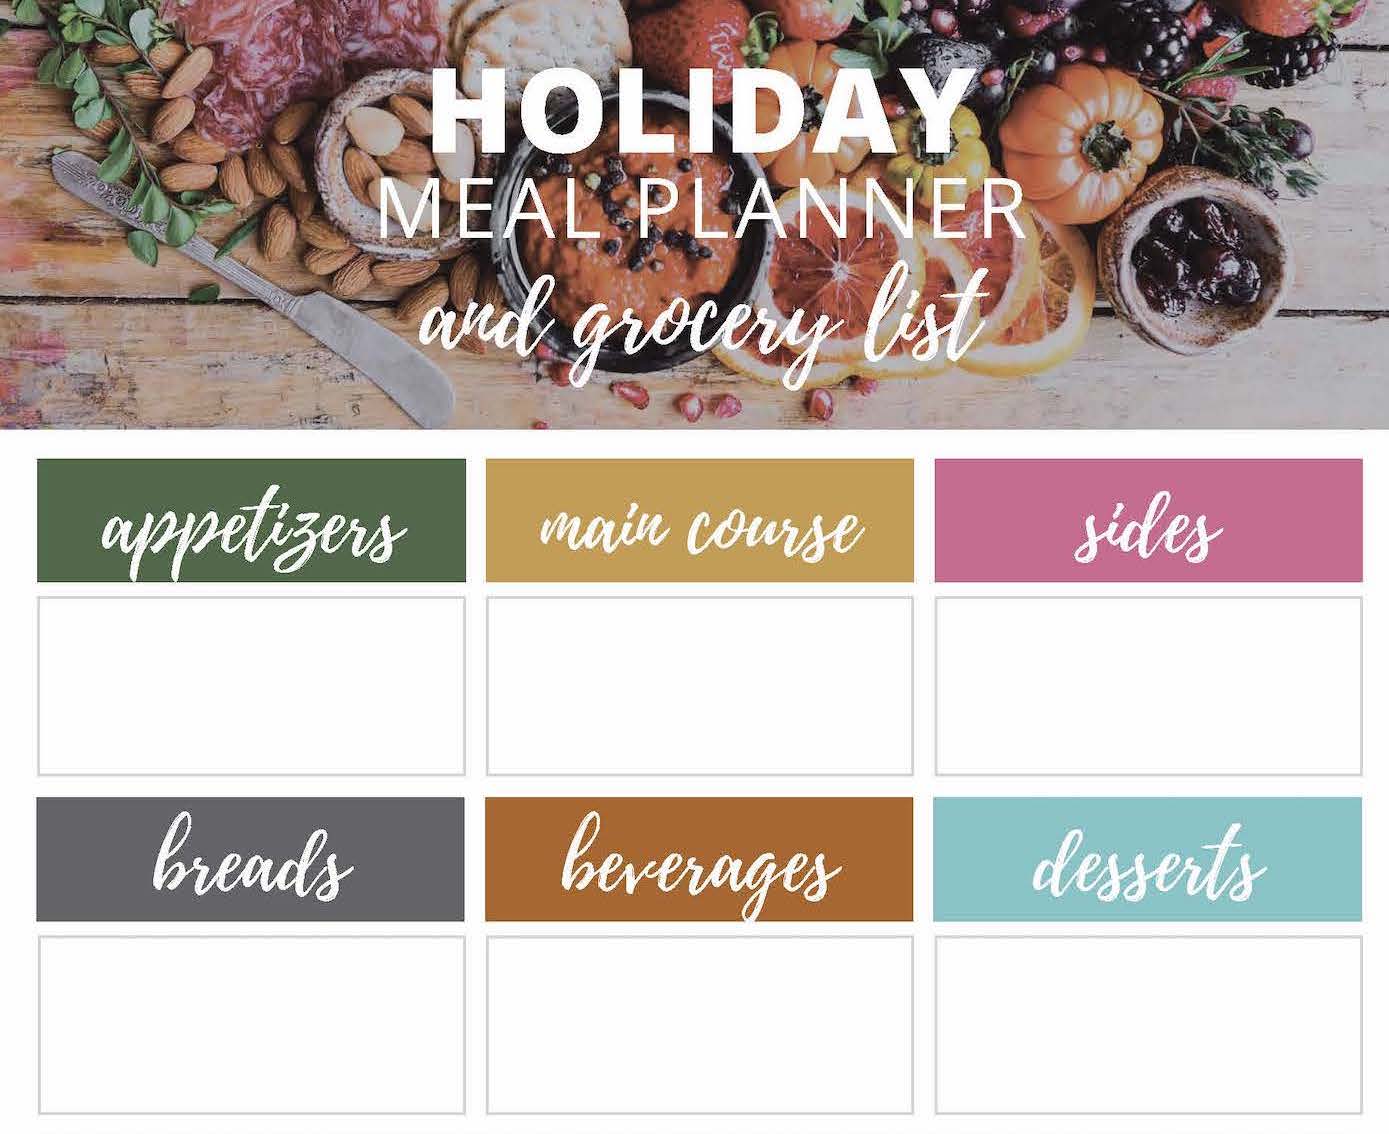 A colorful holiday meal planner and grocery list printable.